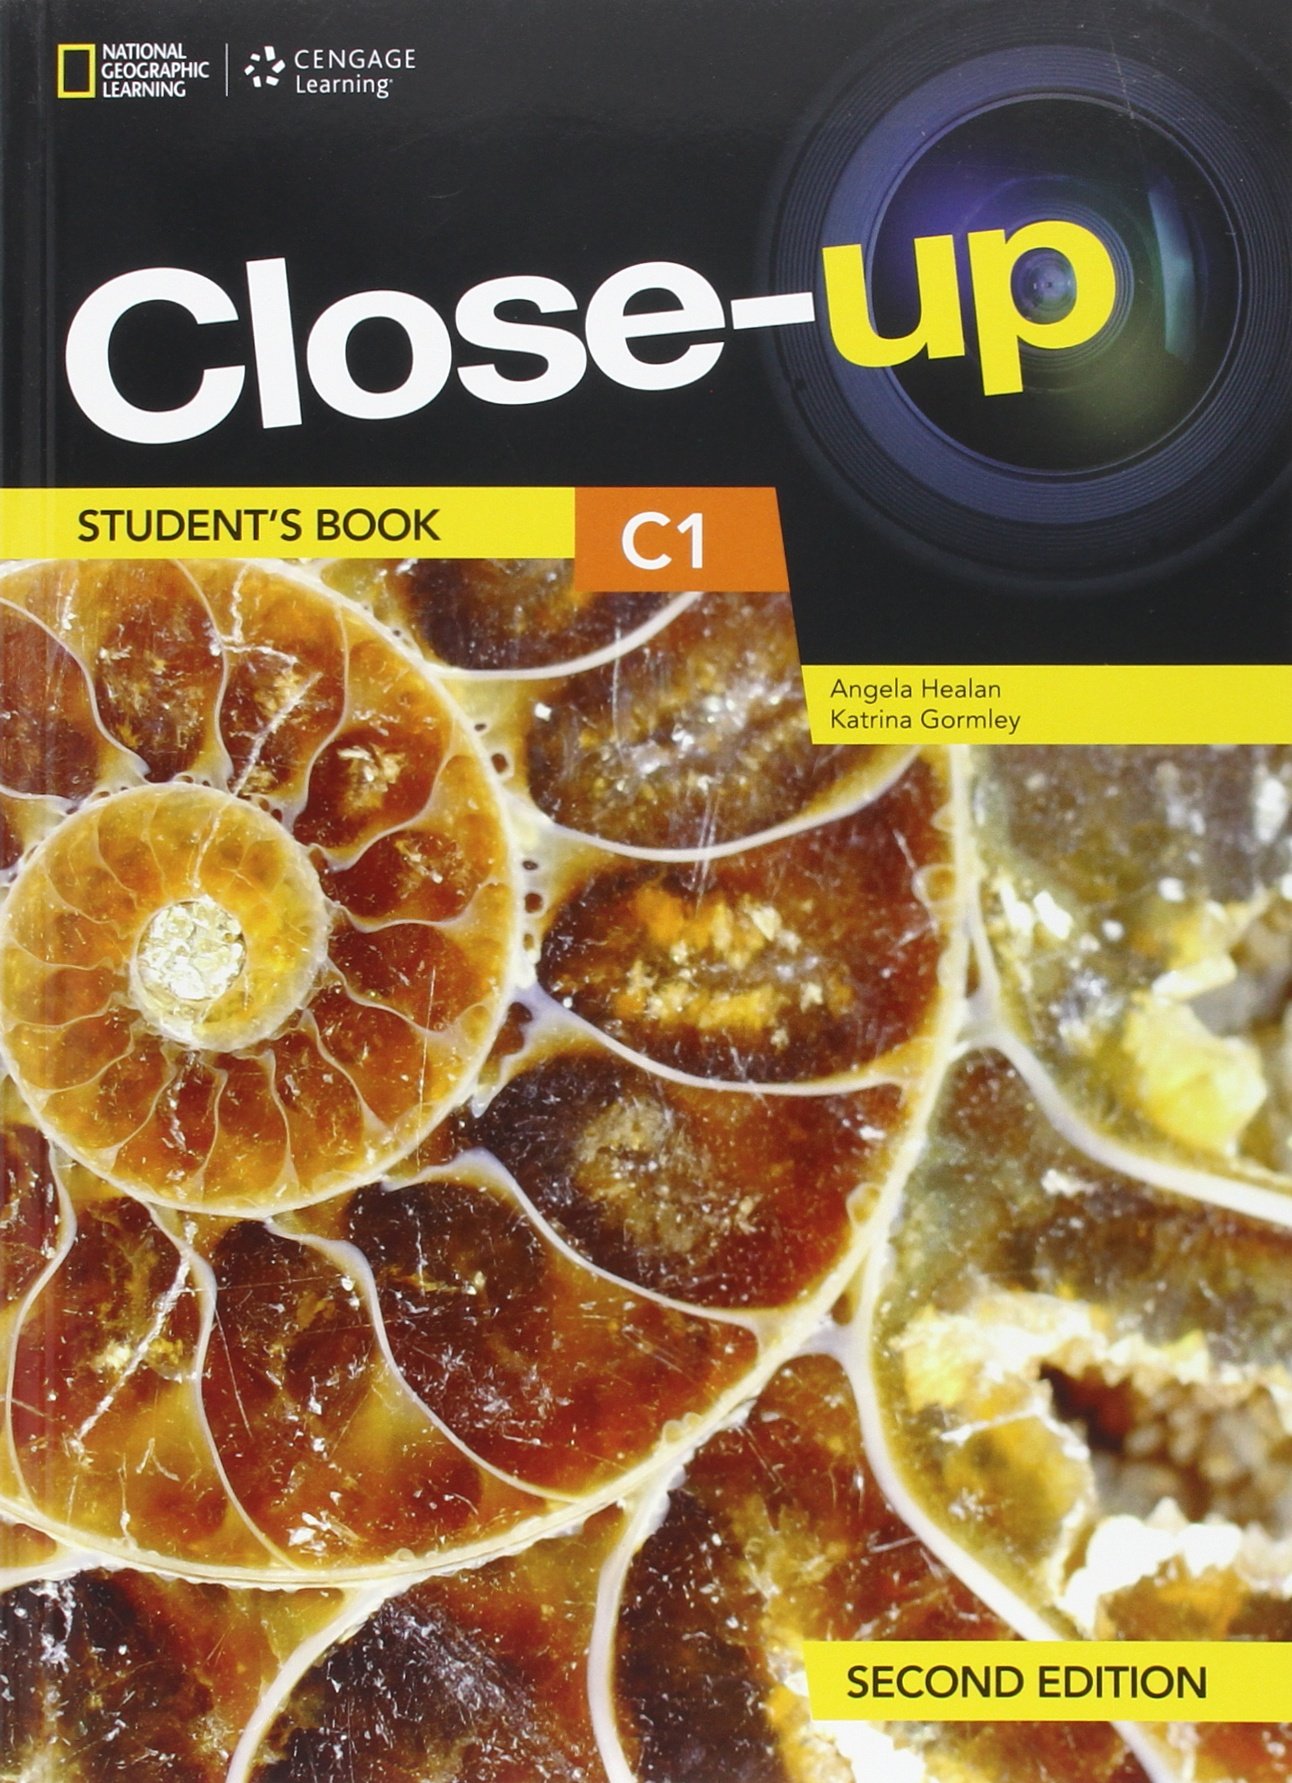 CLOSE-UP 2ND EDITION C1 Student's Book + Online Student Zone